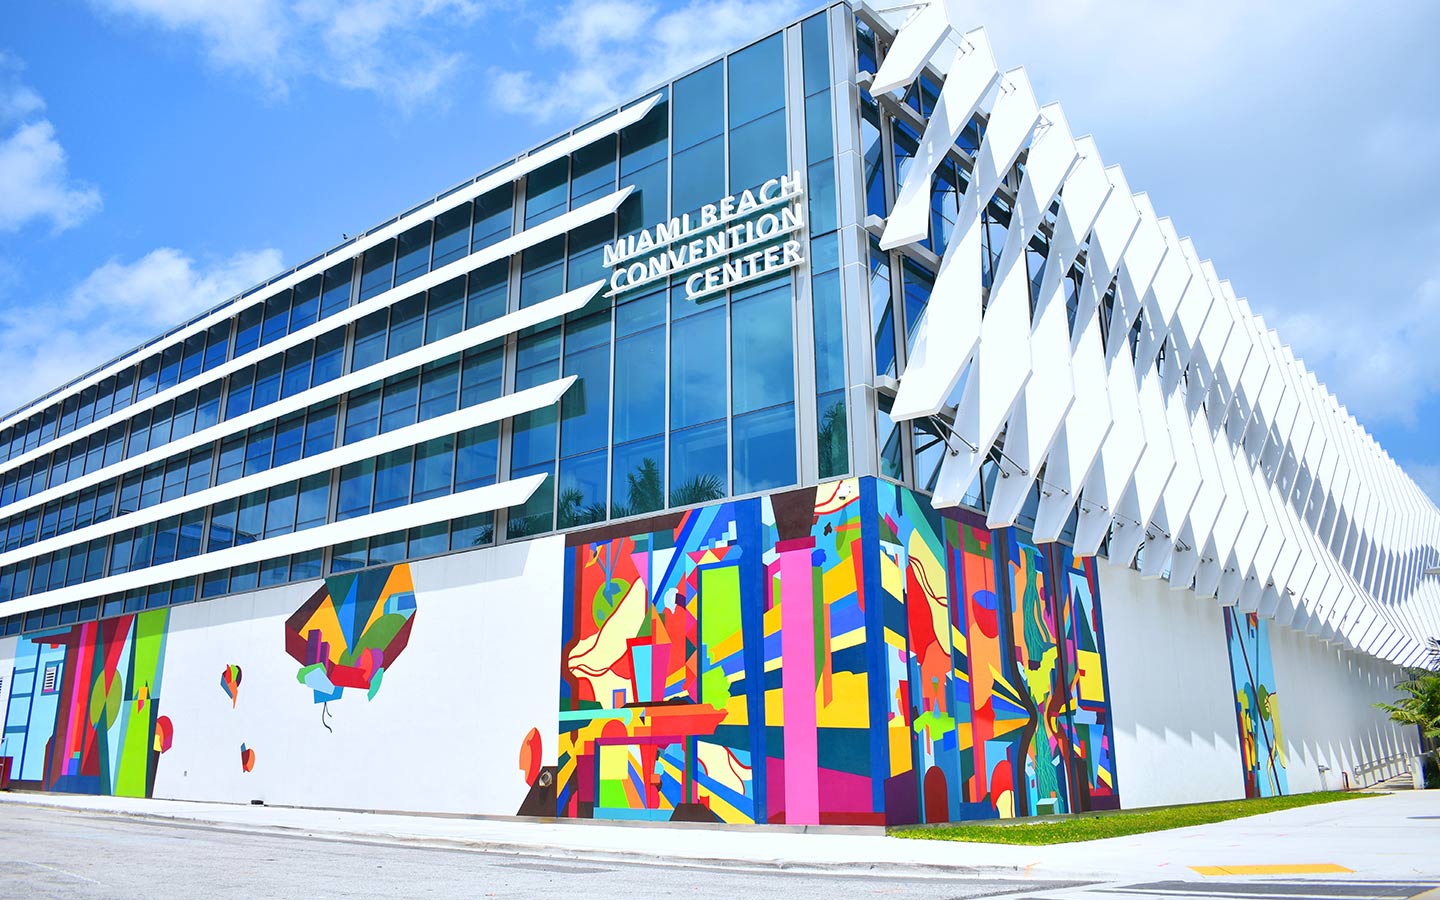 Artwork on the exterior walls of the Miami Beach Convention Center